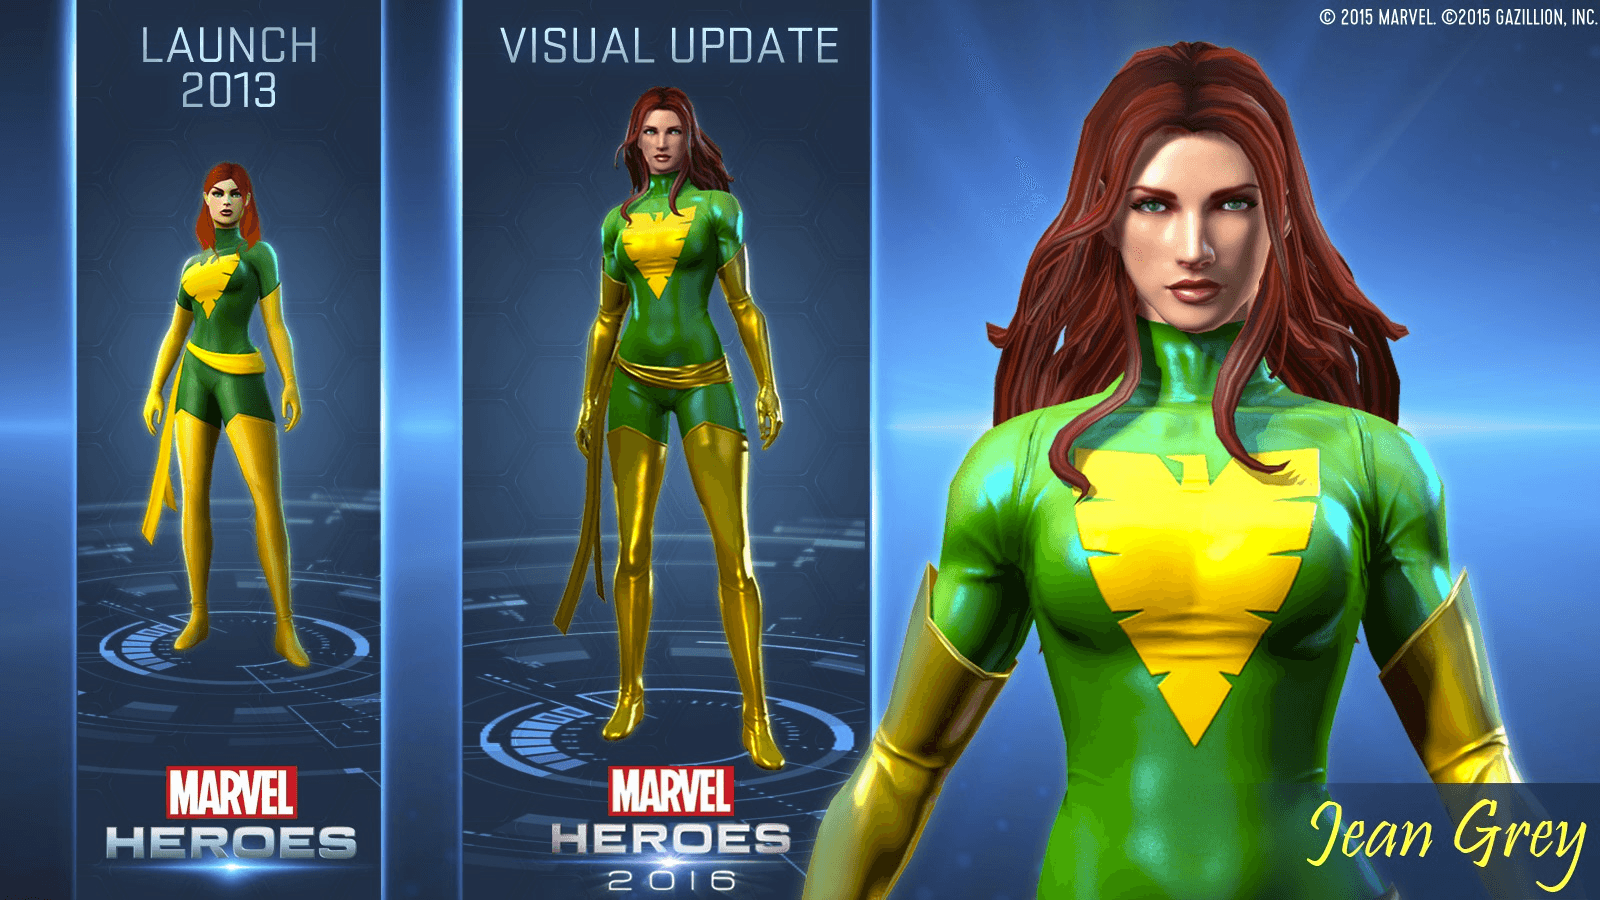 Gazillion Reveals What’s in Store for Marvel Heroes 2016 news header